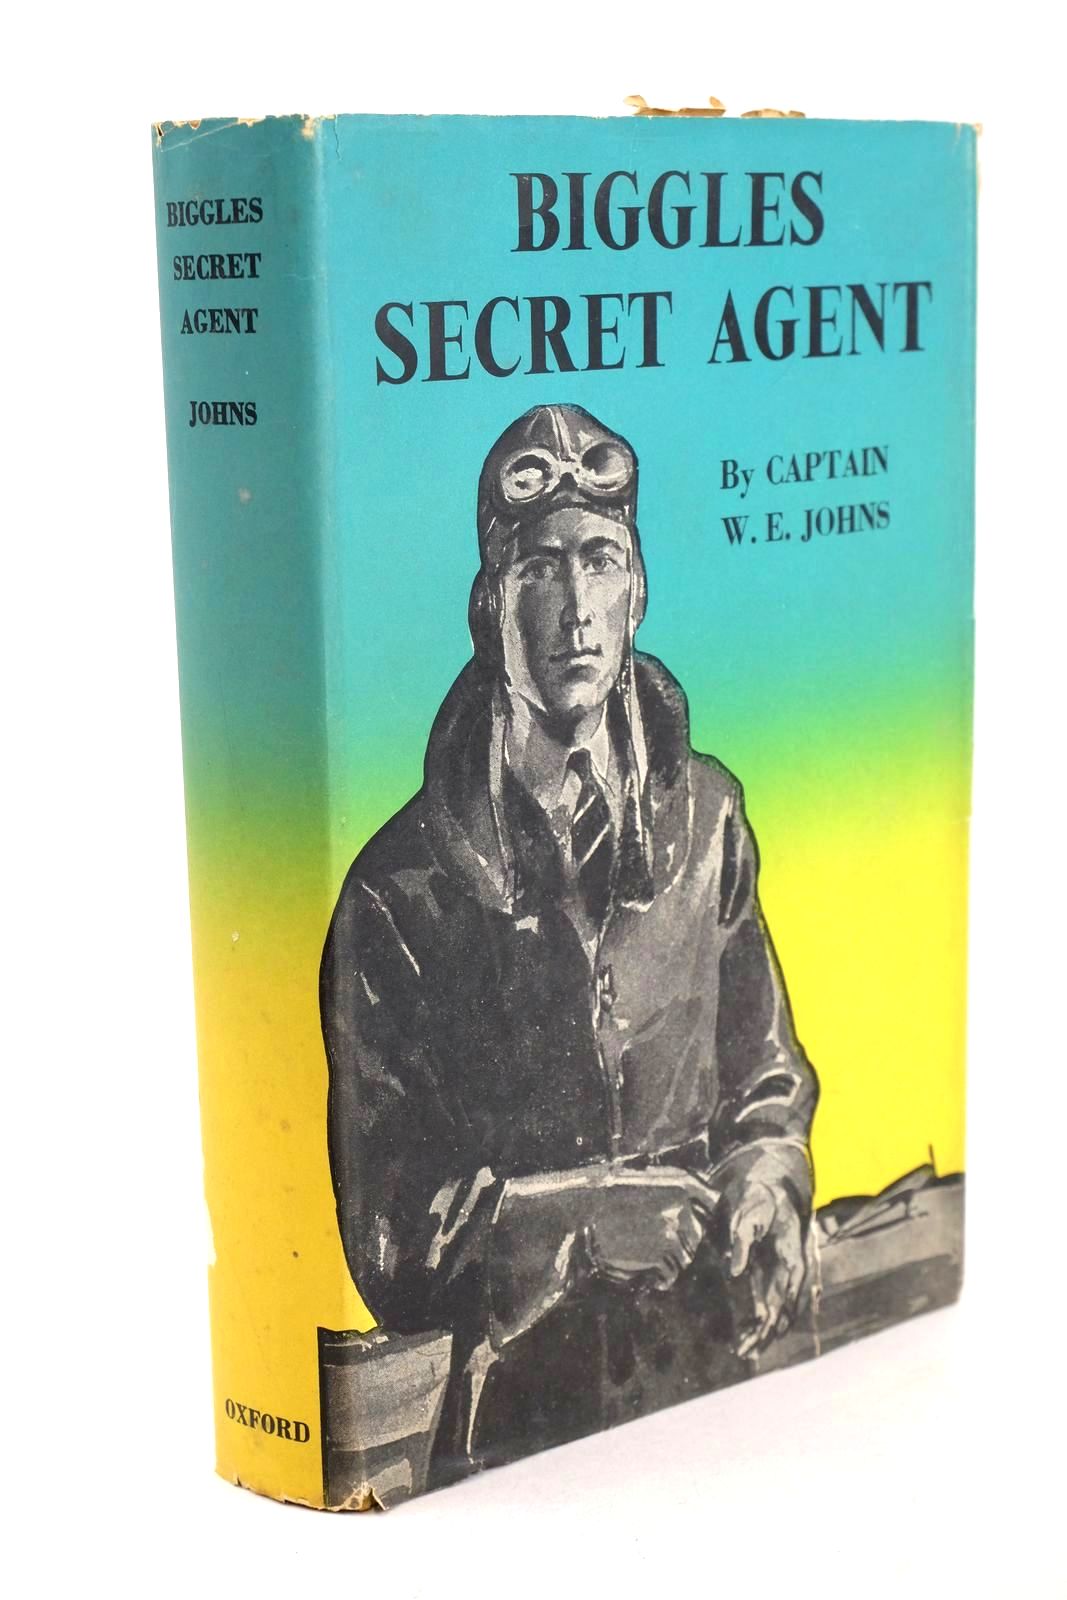 Photo of BIGGLES SECRET AGENT written by Johns, W.E. illustrated by Sindall, Alfred published by Oxford University Press, Geoffrey Cumberlege (STOCK CODE: 1326630)  for sale by Stella & Rose's Books